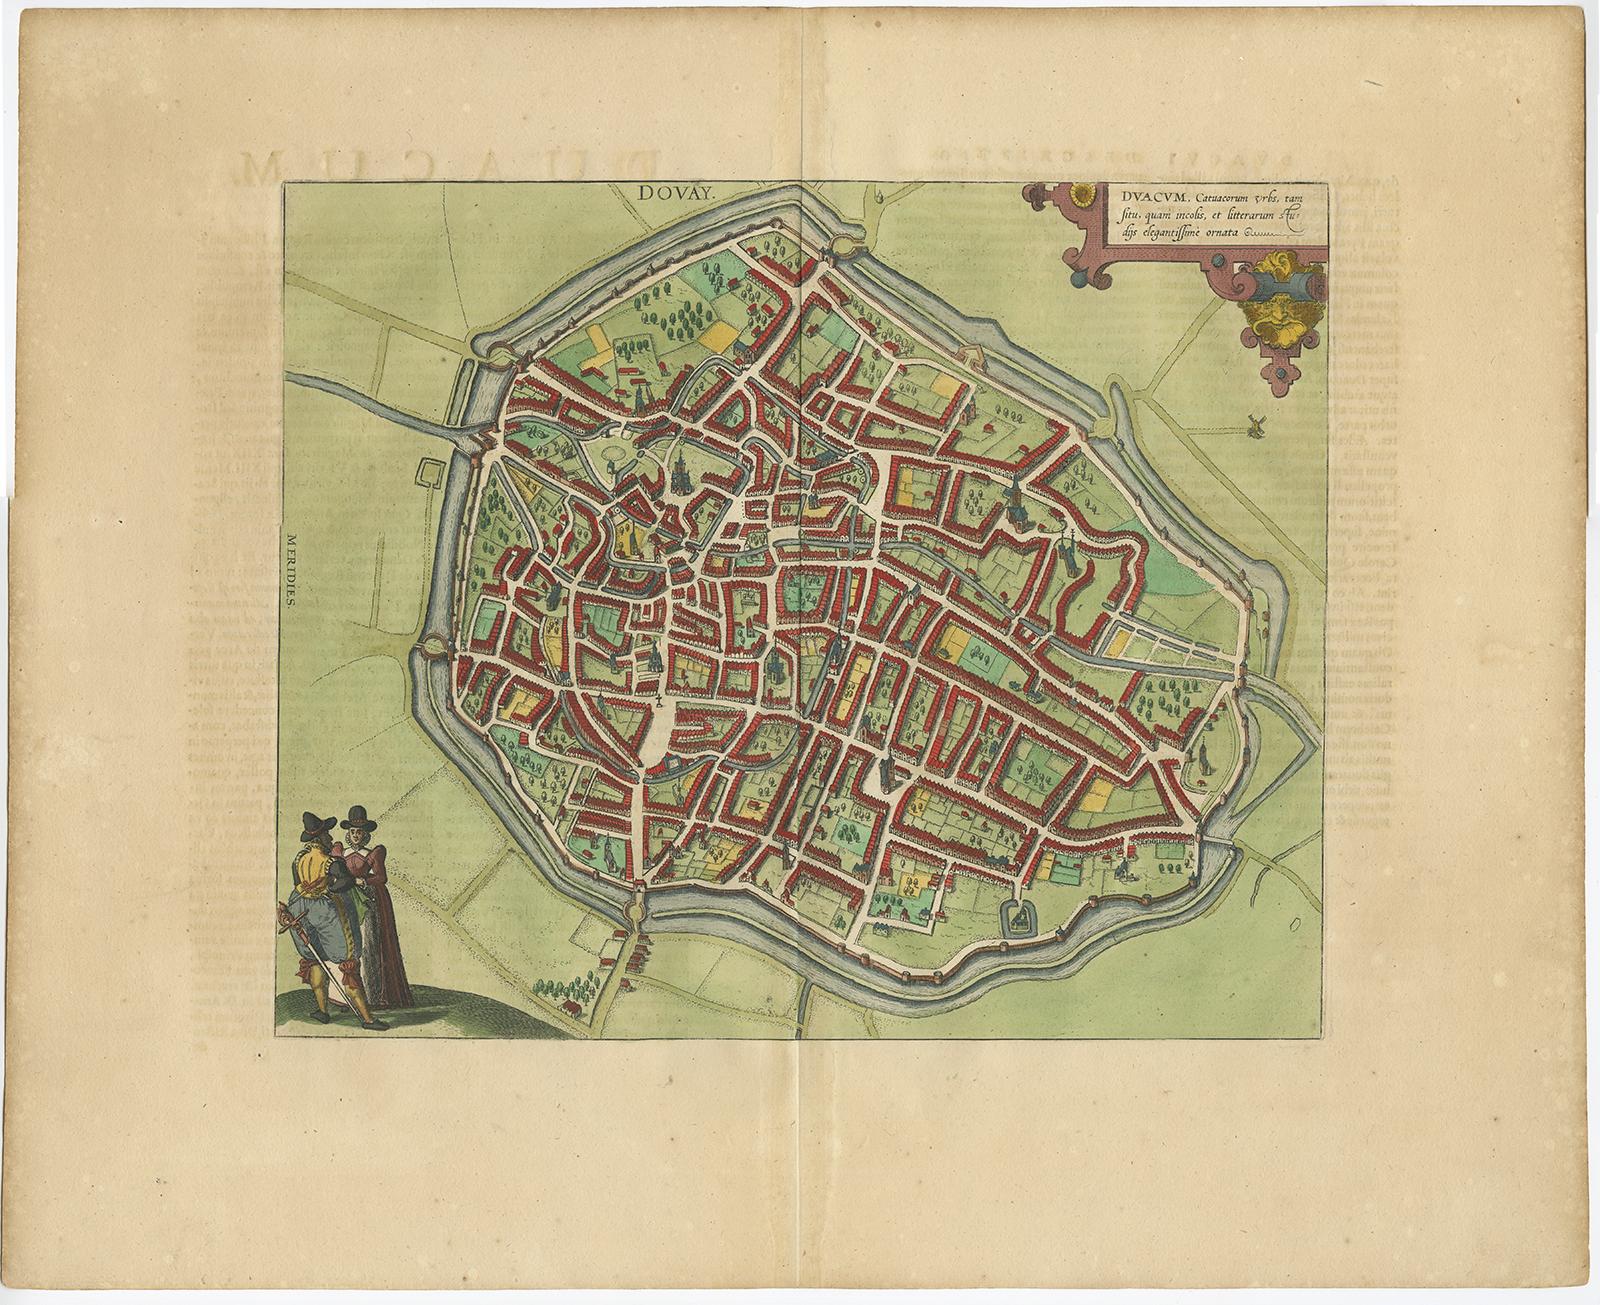 Beautiful map in excellent condition. This map depicts the city of Douai (France) and originates from 'Civitates Orbis Terrarum'.